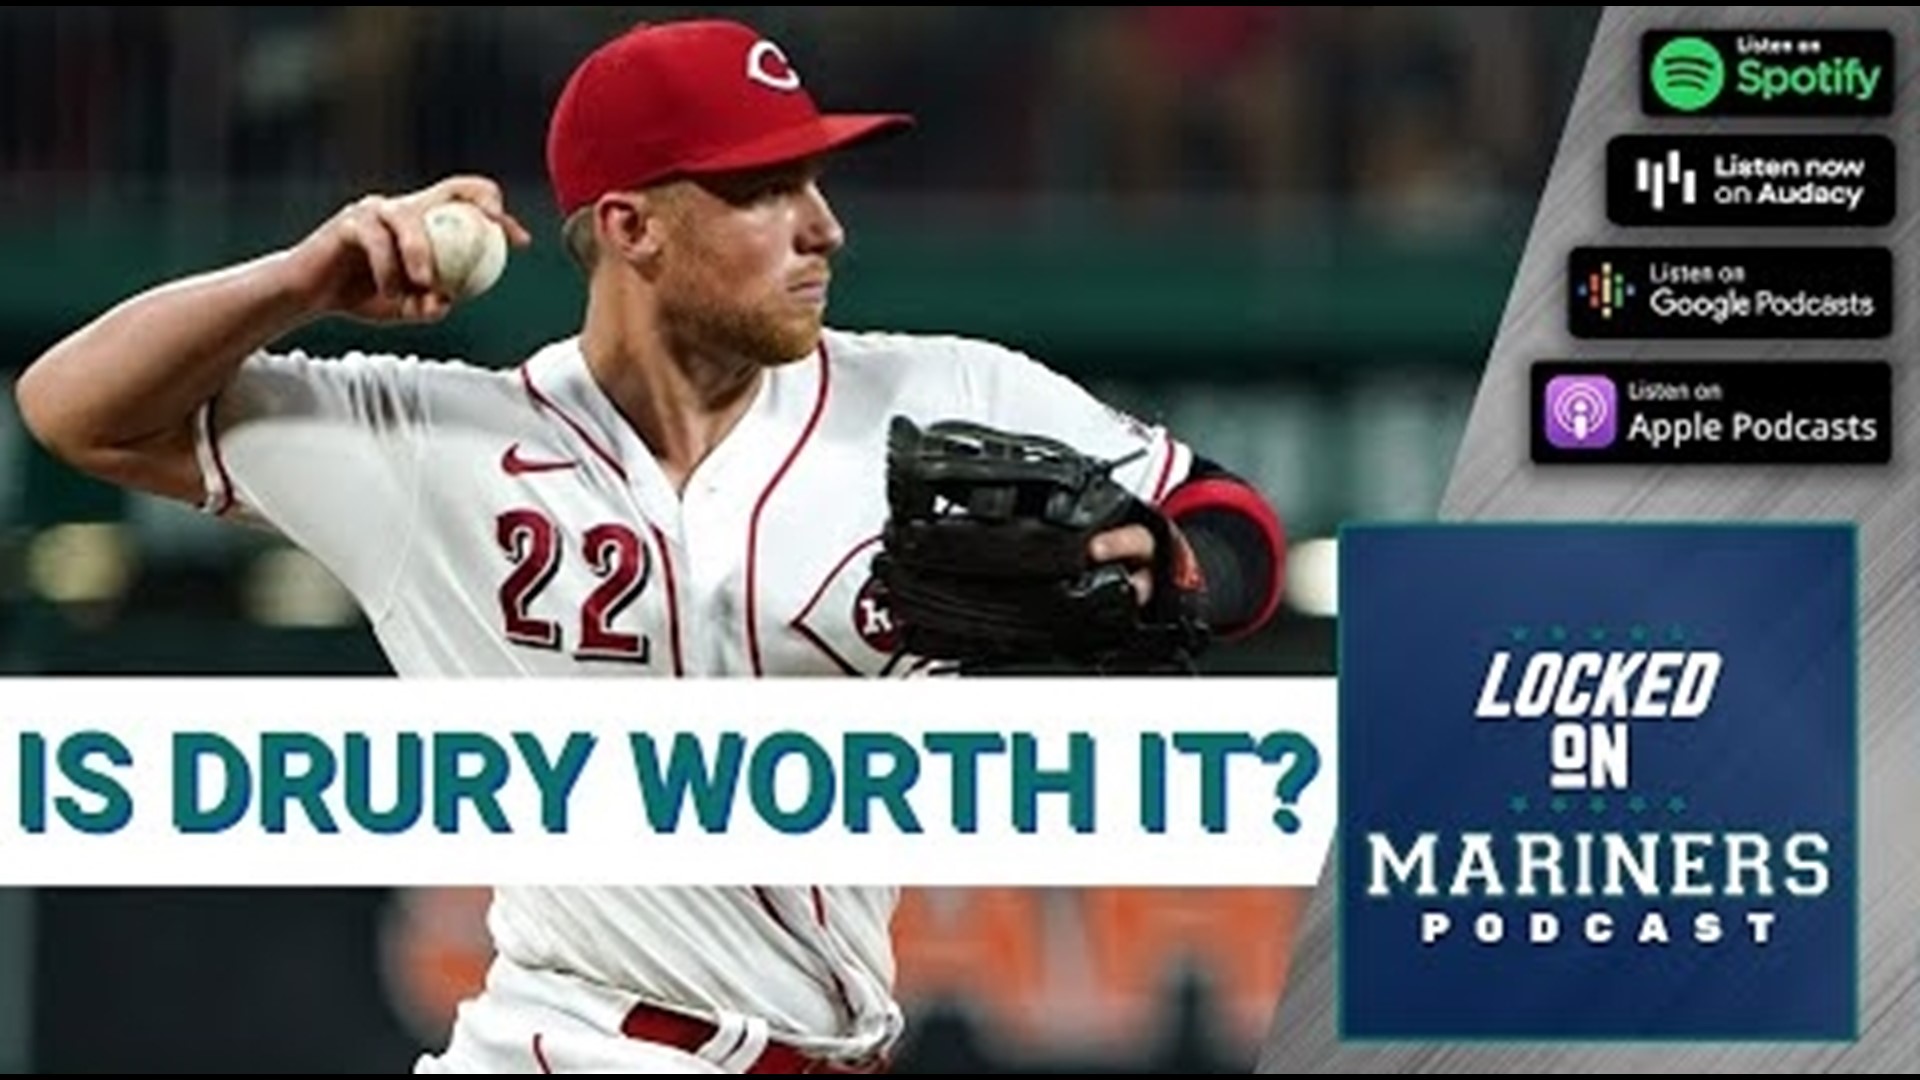 The Mariners are headed to the nation's capital to take on the struggling Washington Nationals. But Ty and Colby are concerned they might be headed into a trap...